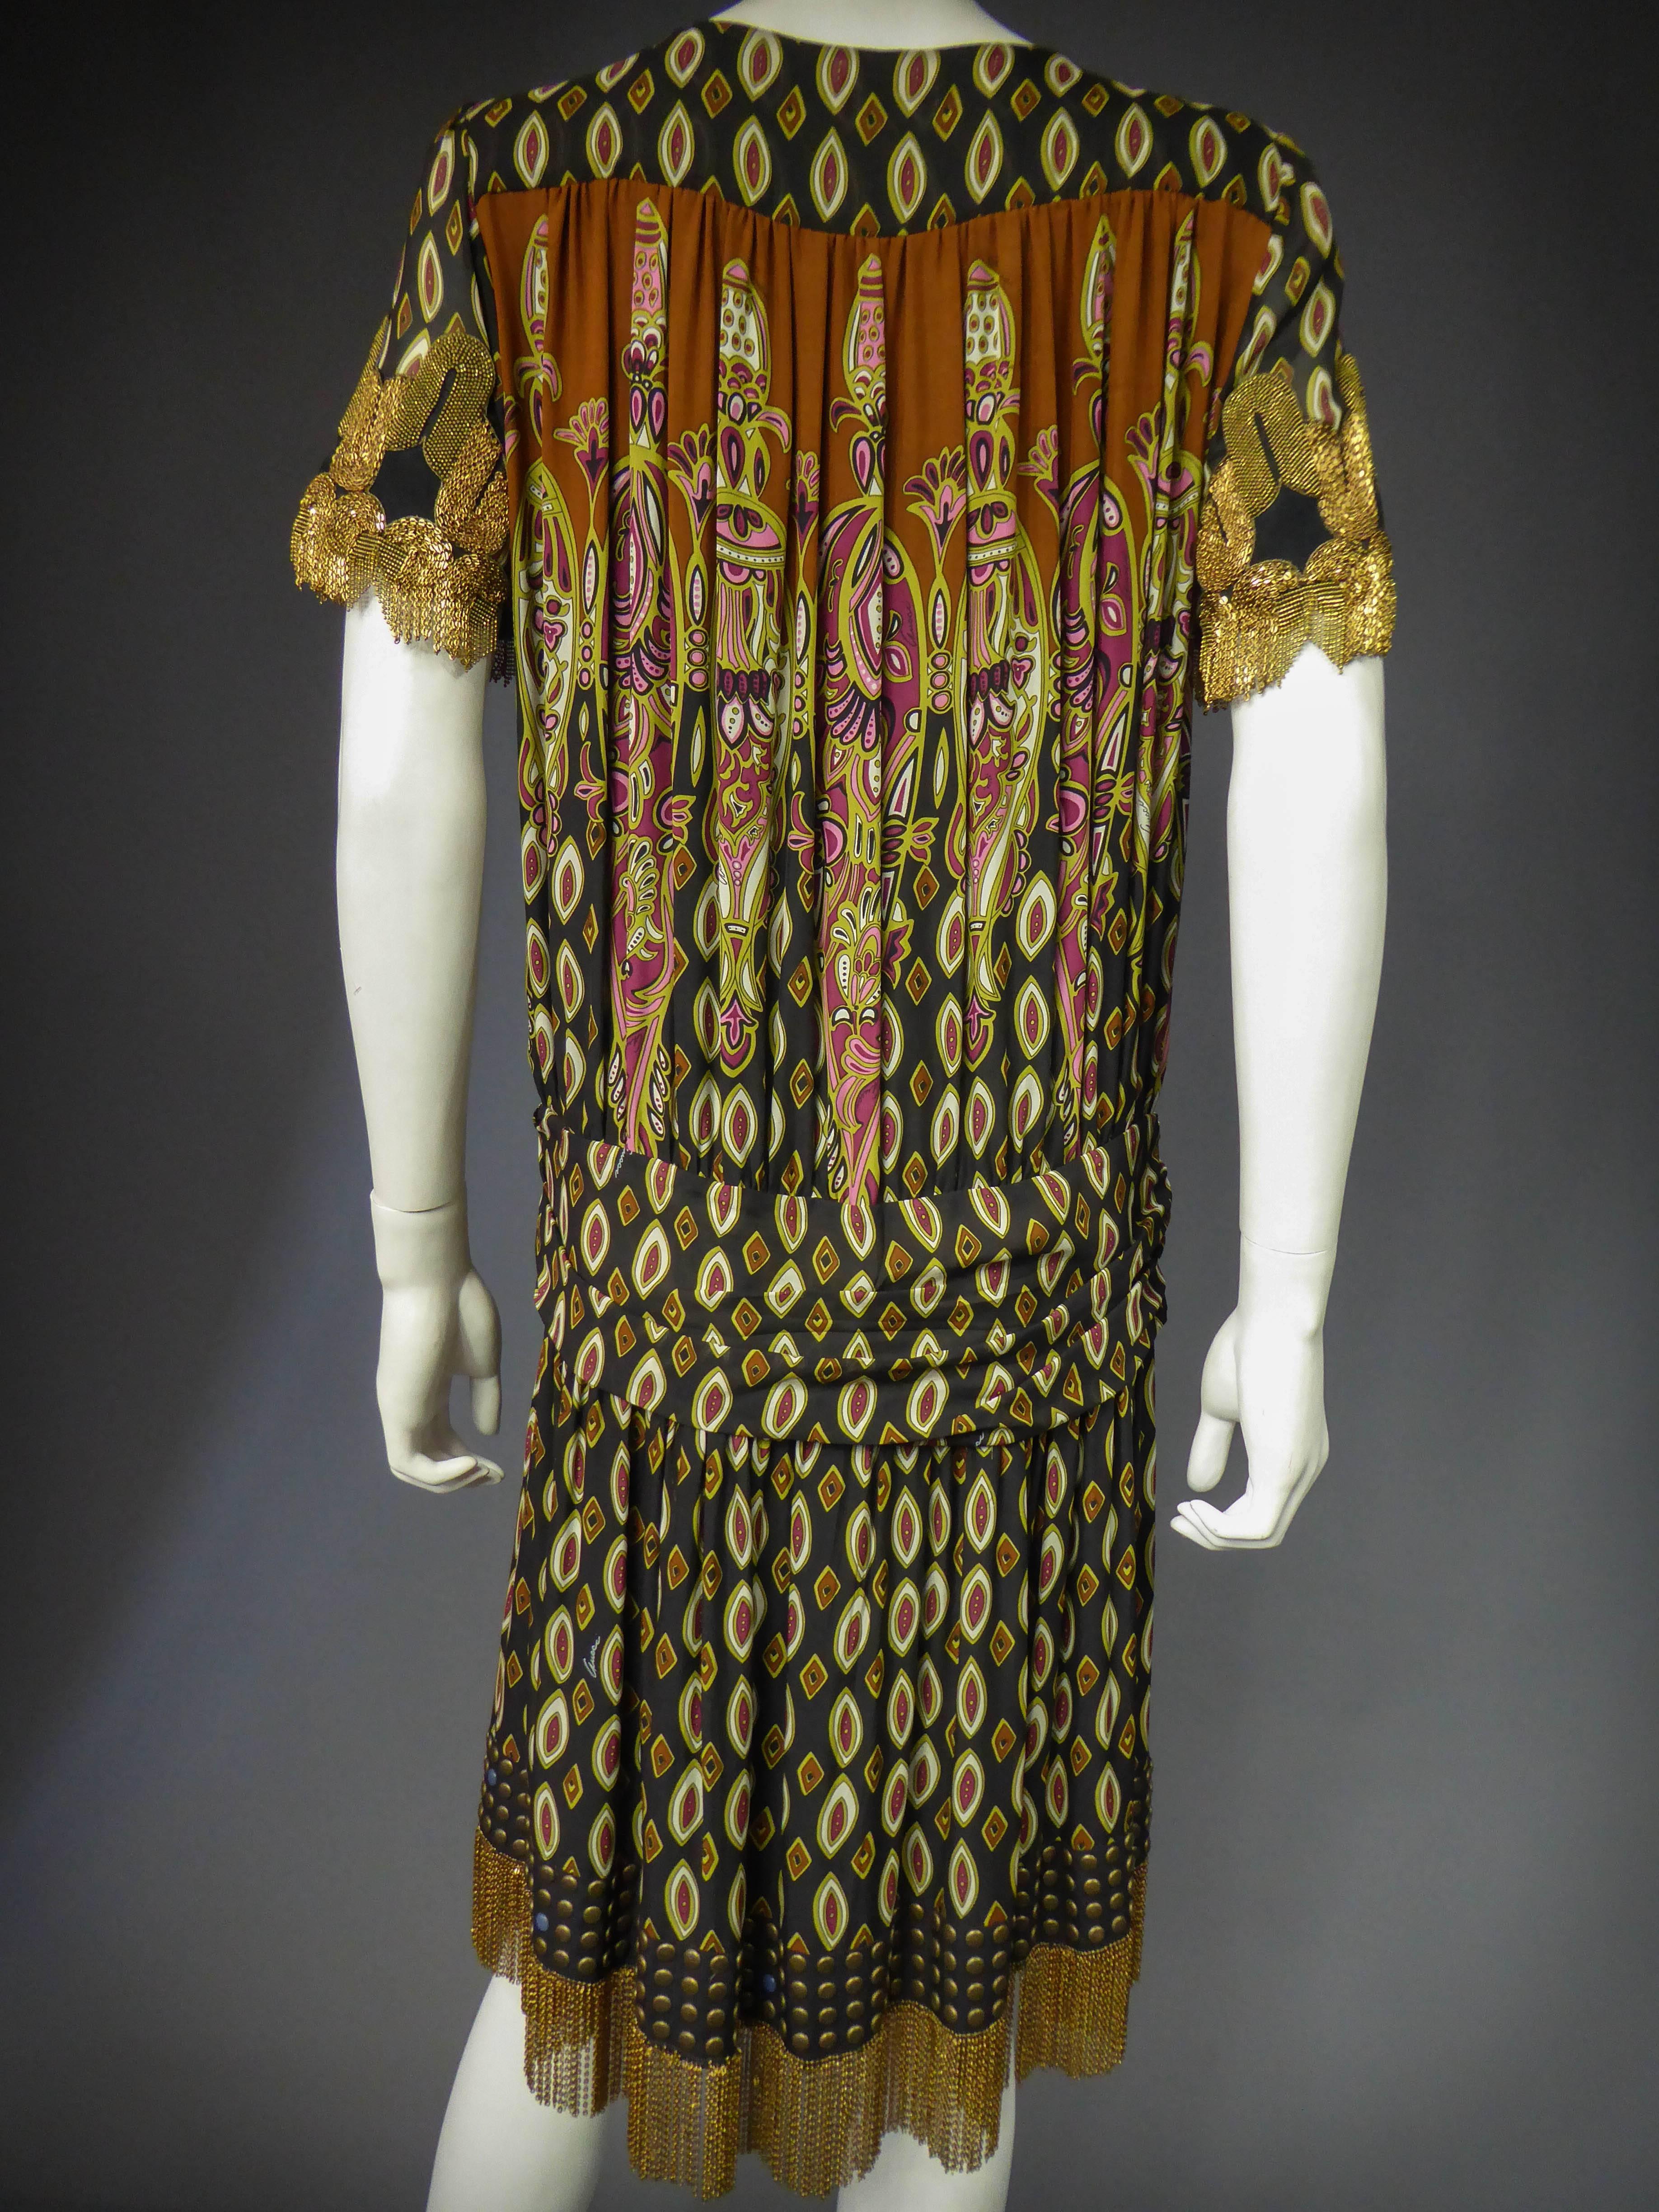 A Printed Silk Gucci Dress Fall / Winter 2008 - 2009 For Sale 3